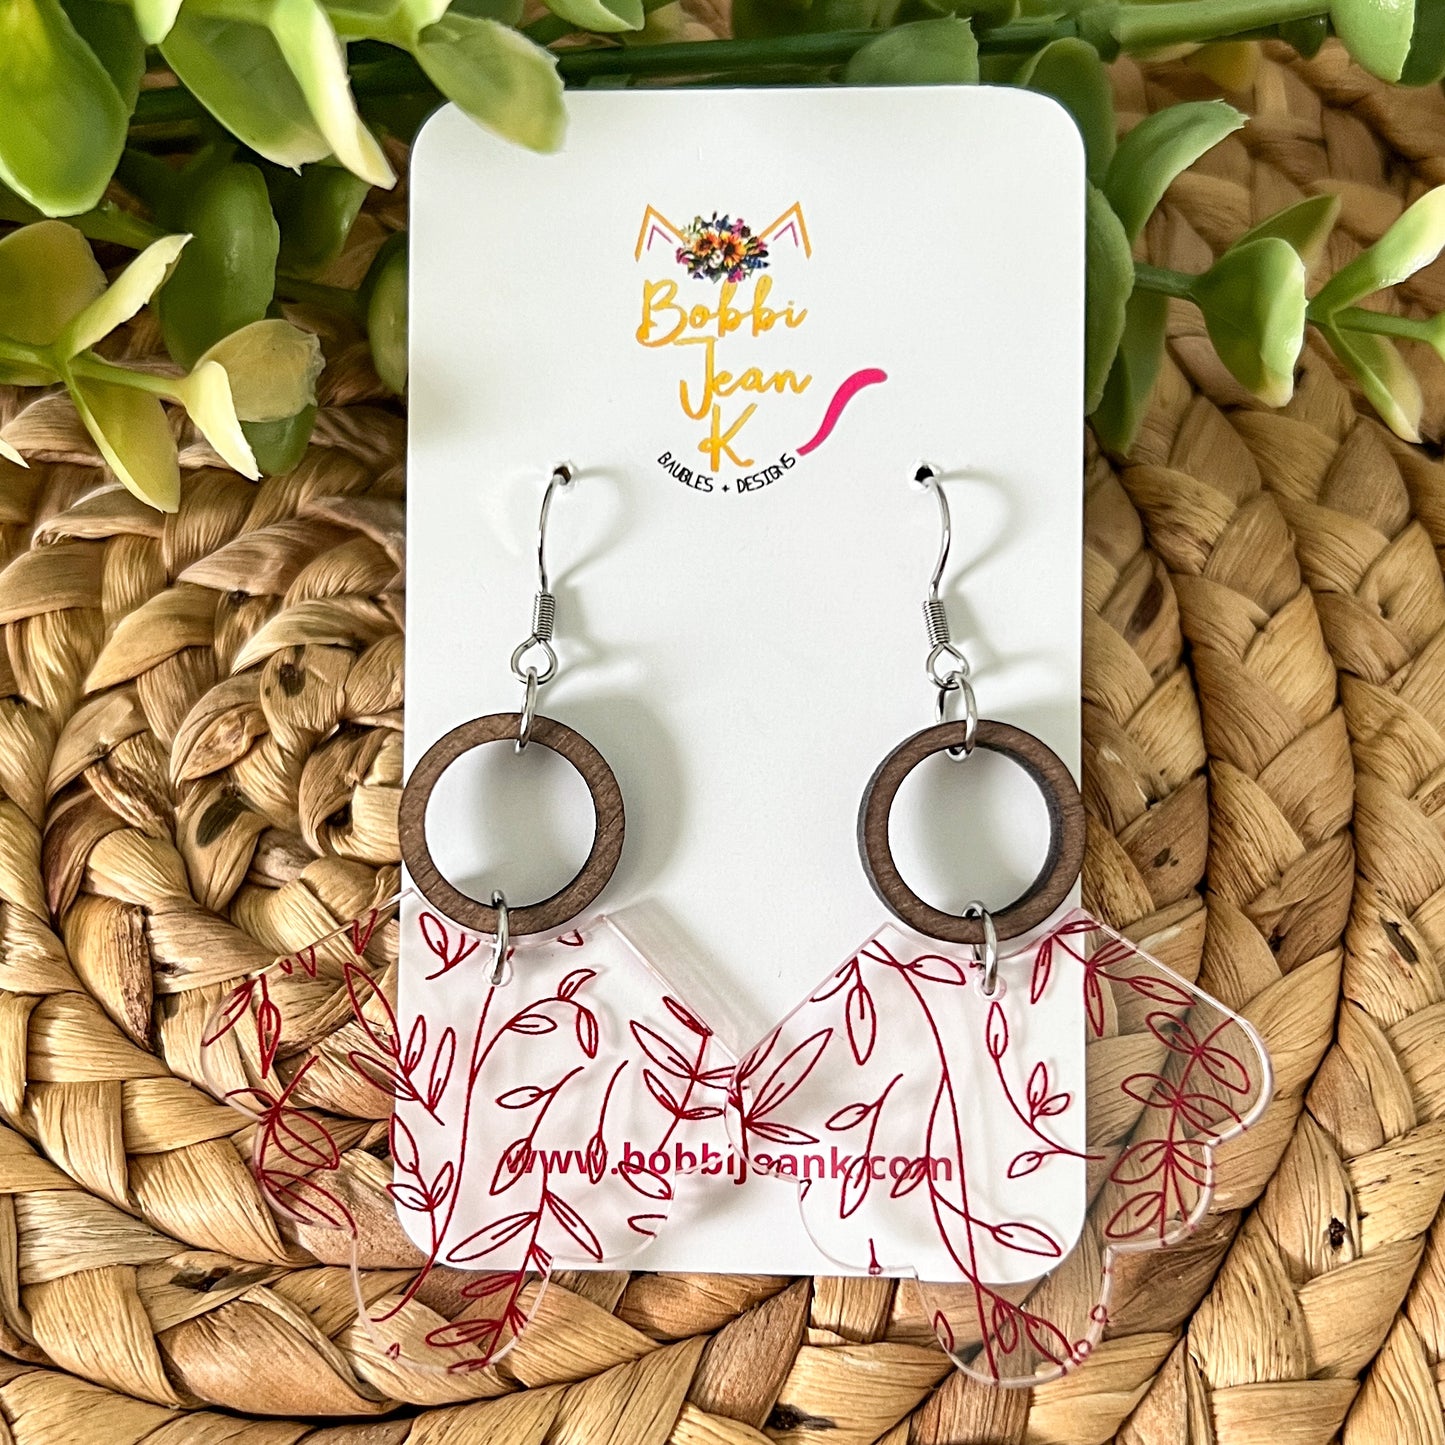 Scalloped Vines Acrylic Earrings: Choose From 3 Colors - LAST CHANCE